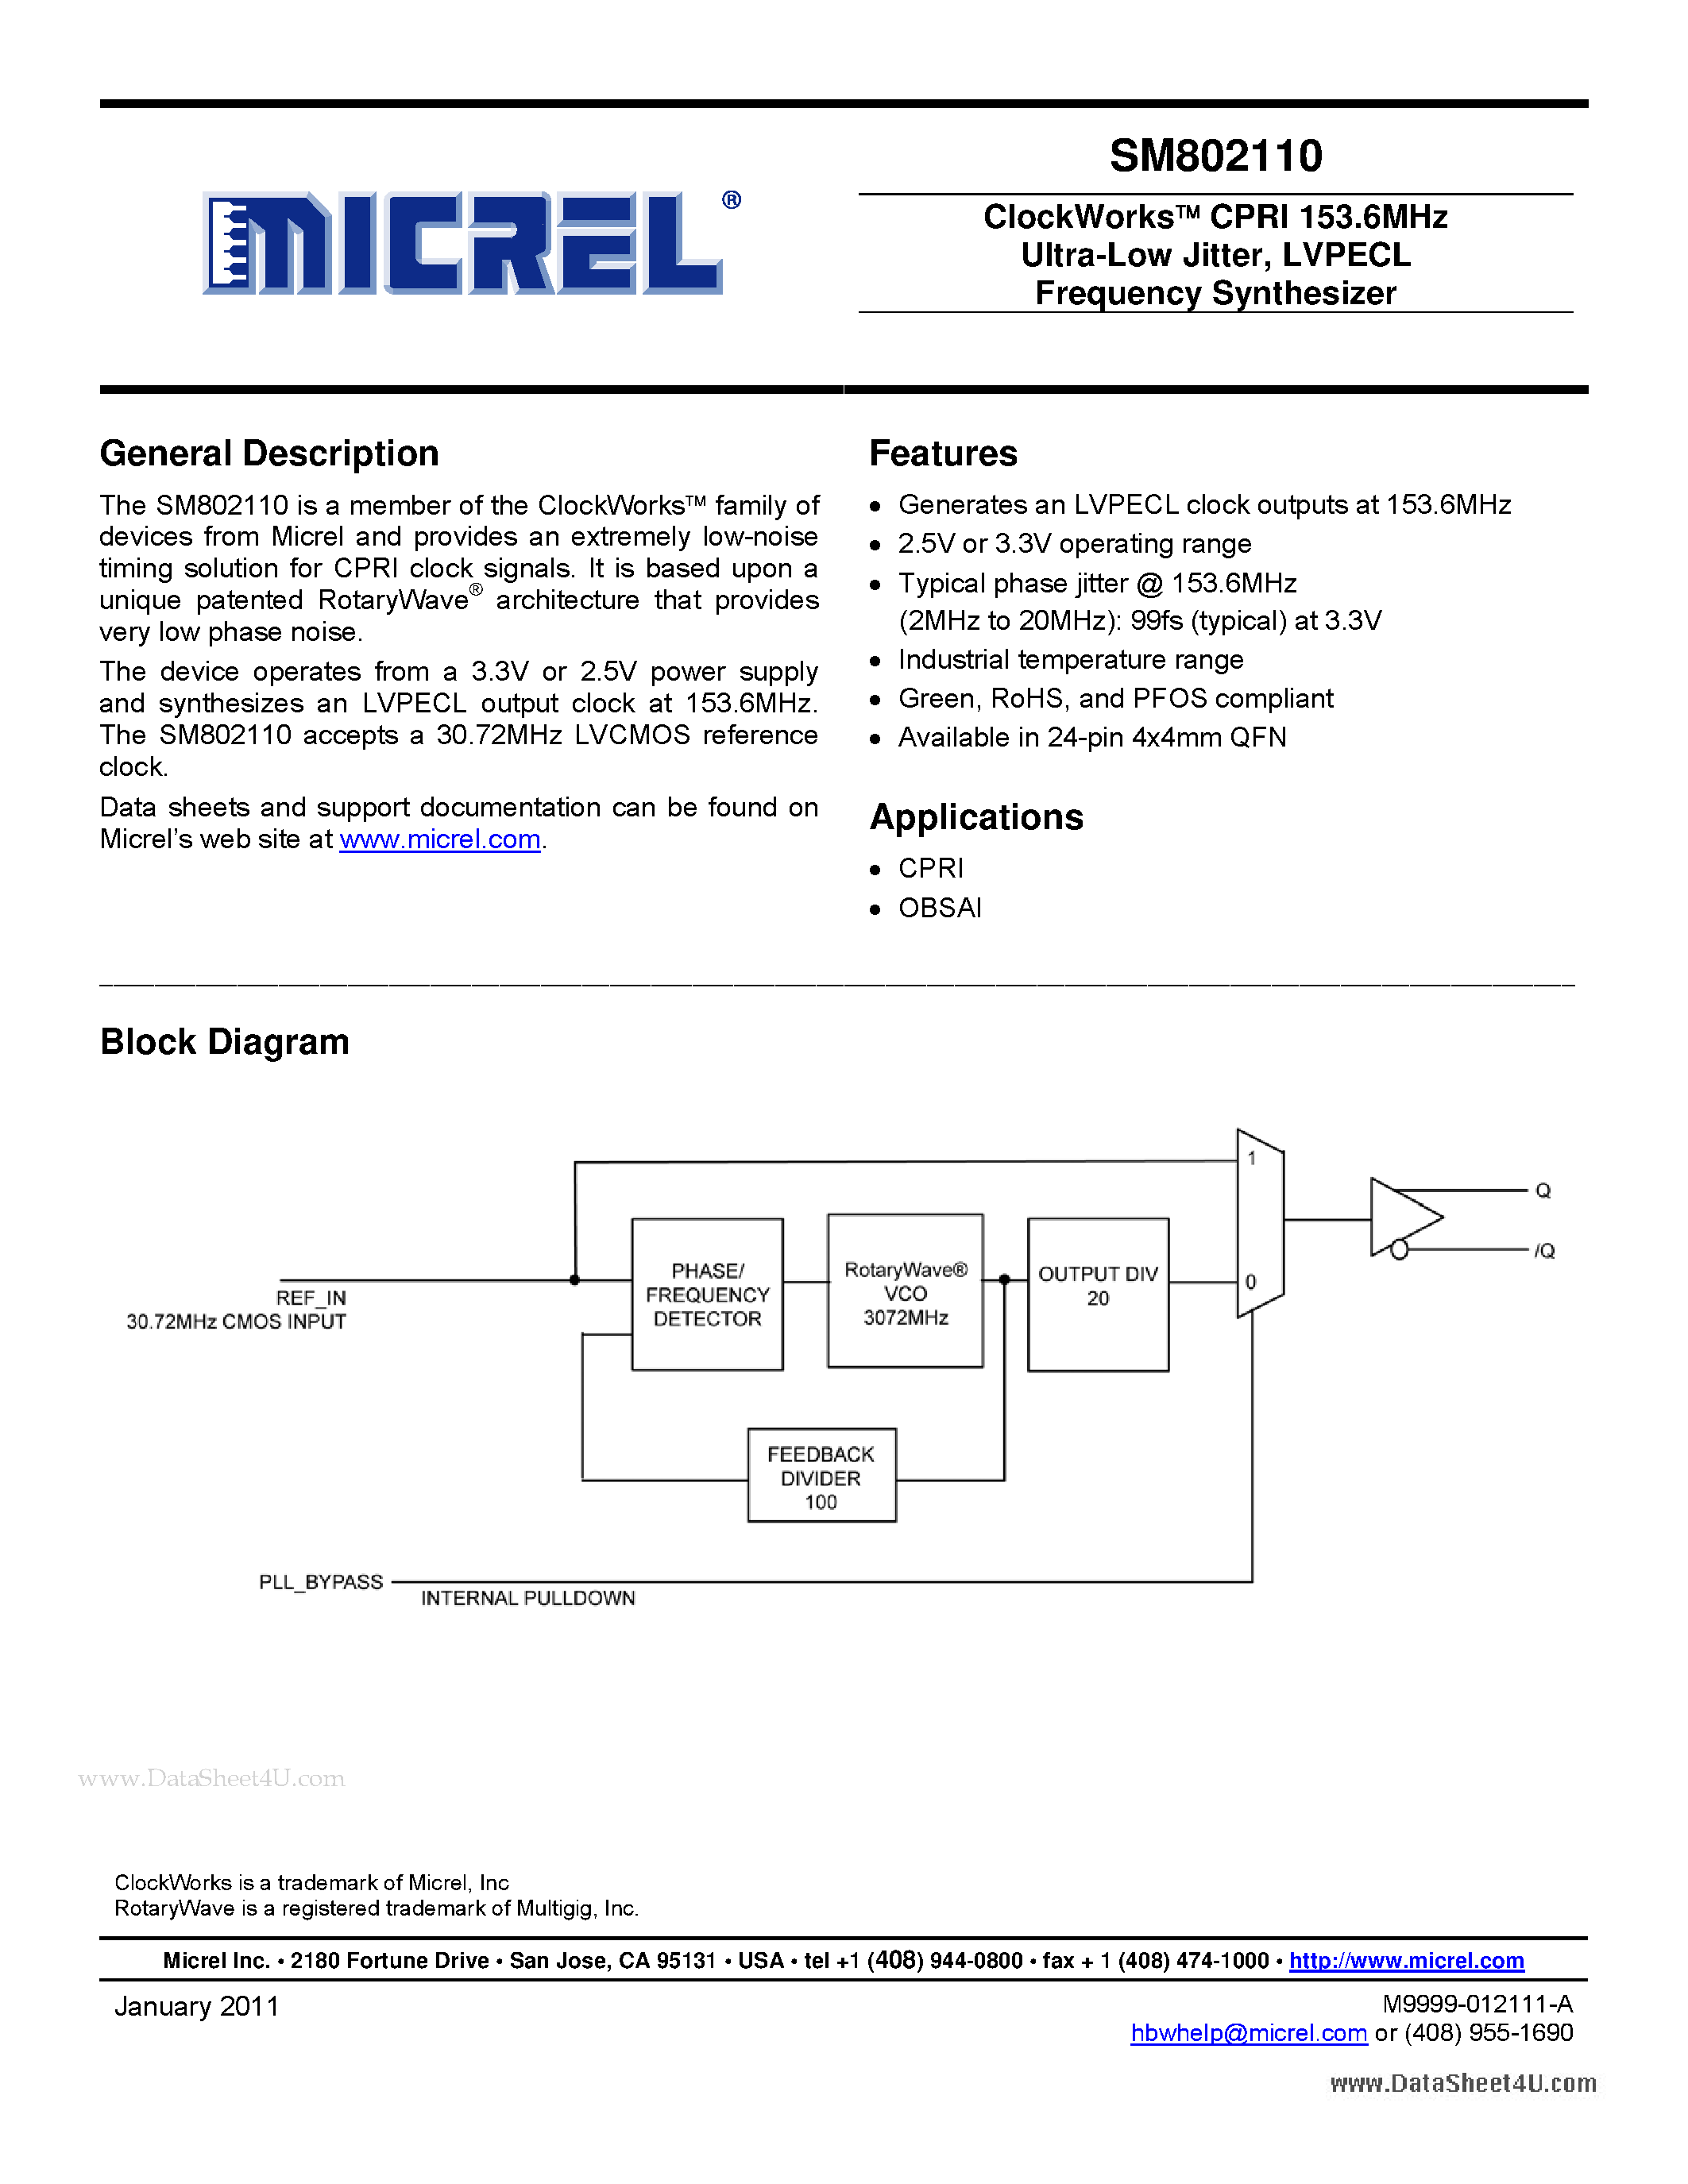 Datasheet SM802110 - ClockWorks CPRI 153.6MHz Ultra-Low Jitter - LVPECL Frequency Synthesizer page 1